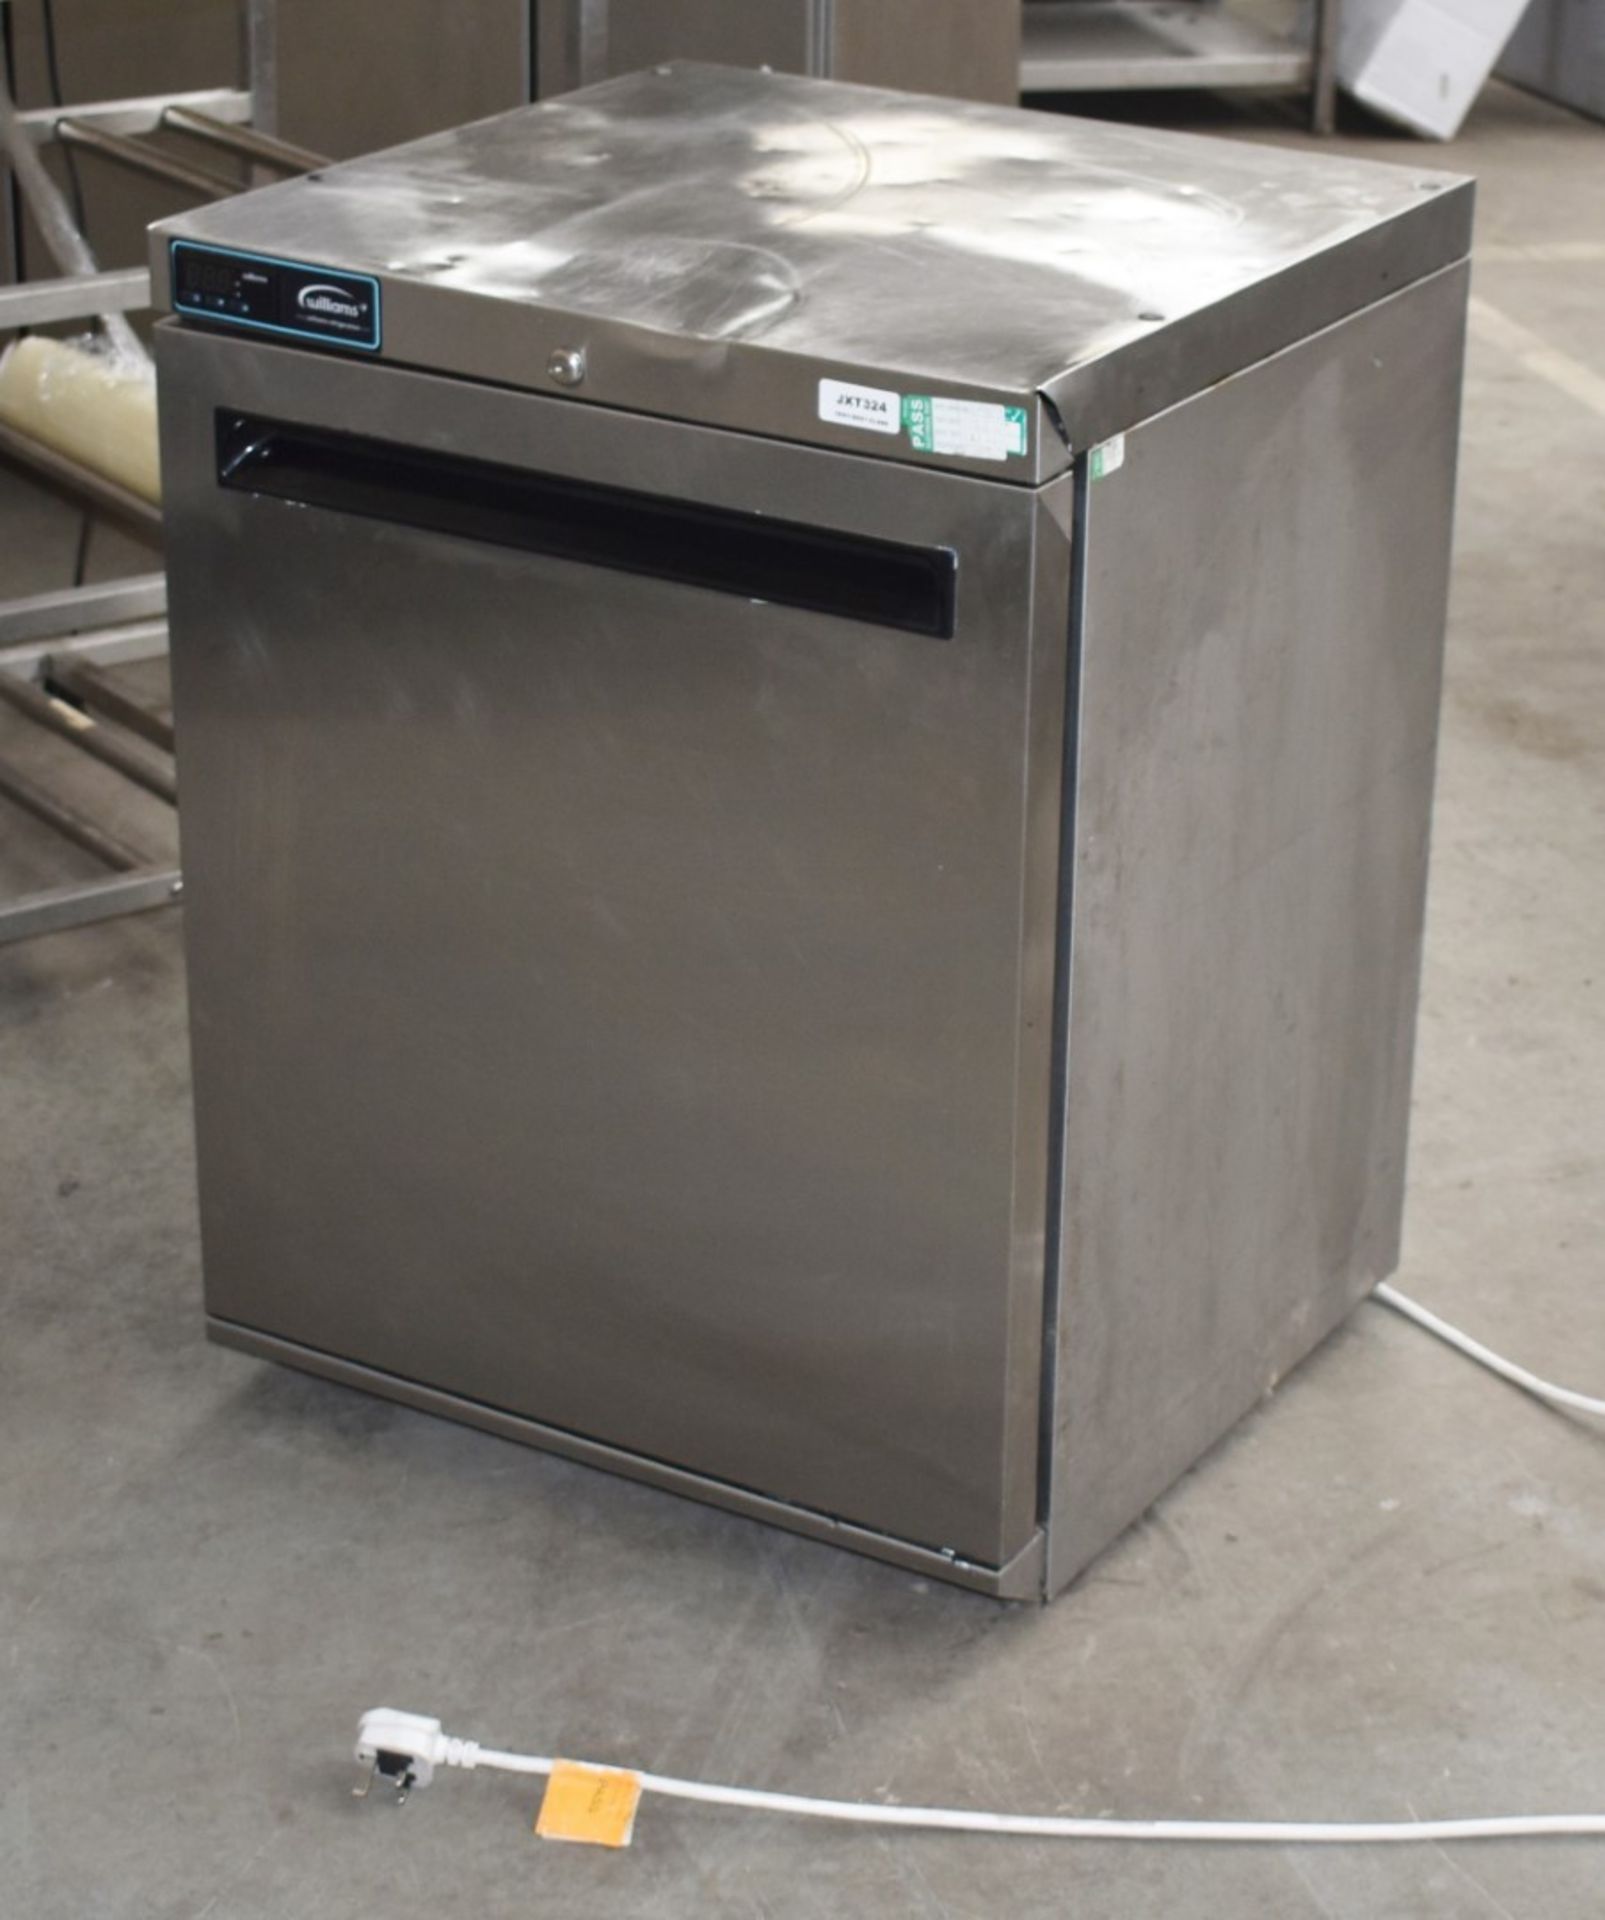 1 x Williams HA135SA Undercounter Refrigerator With Stainless Steel Exterior - Dimensions: H80 x W60 - Image 5 of 8